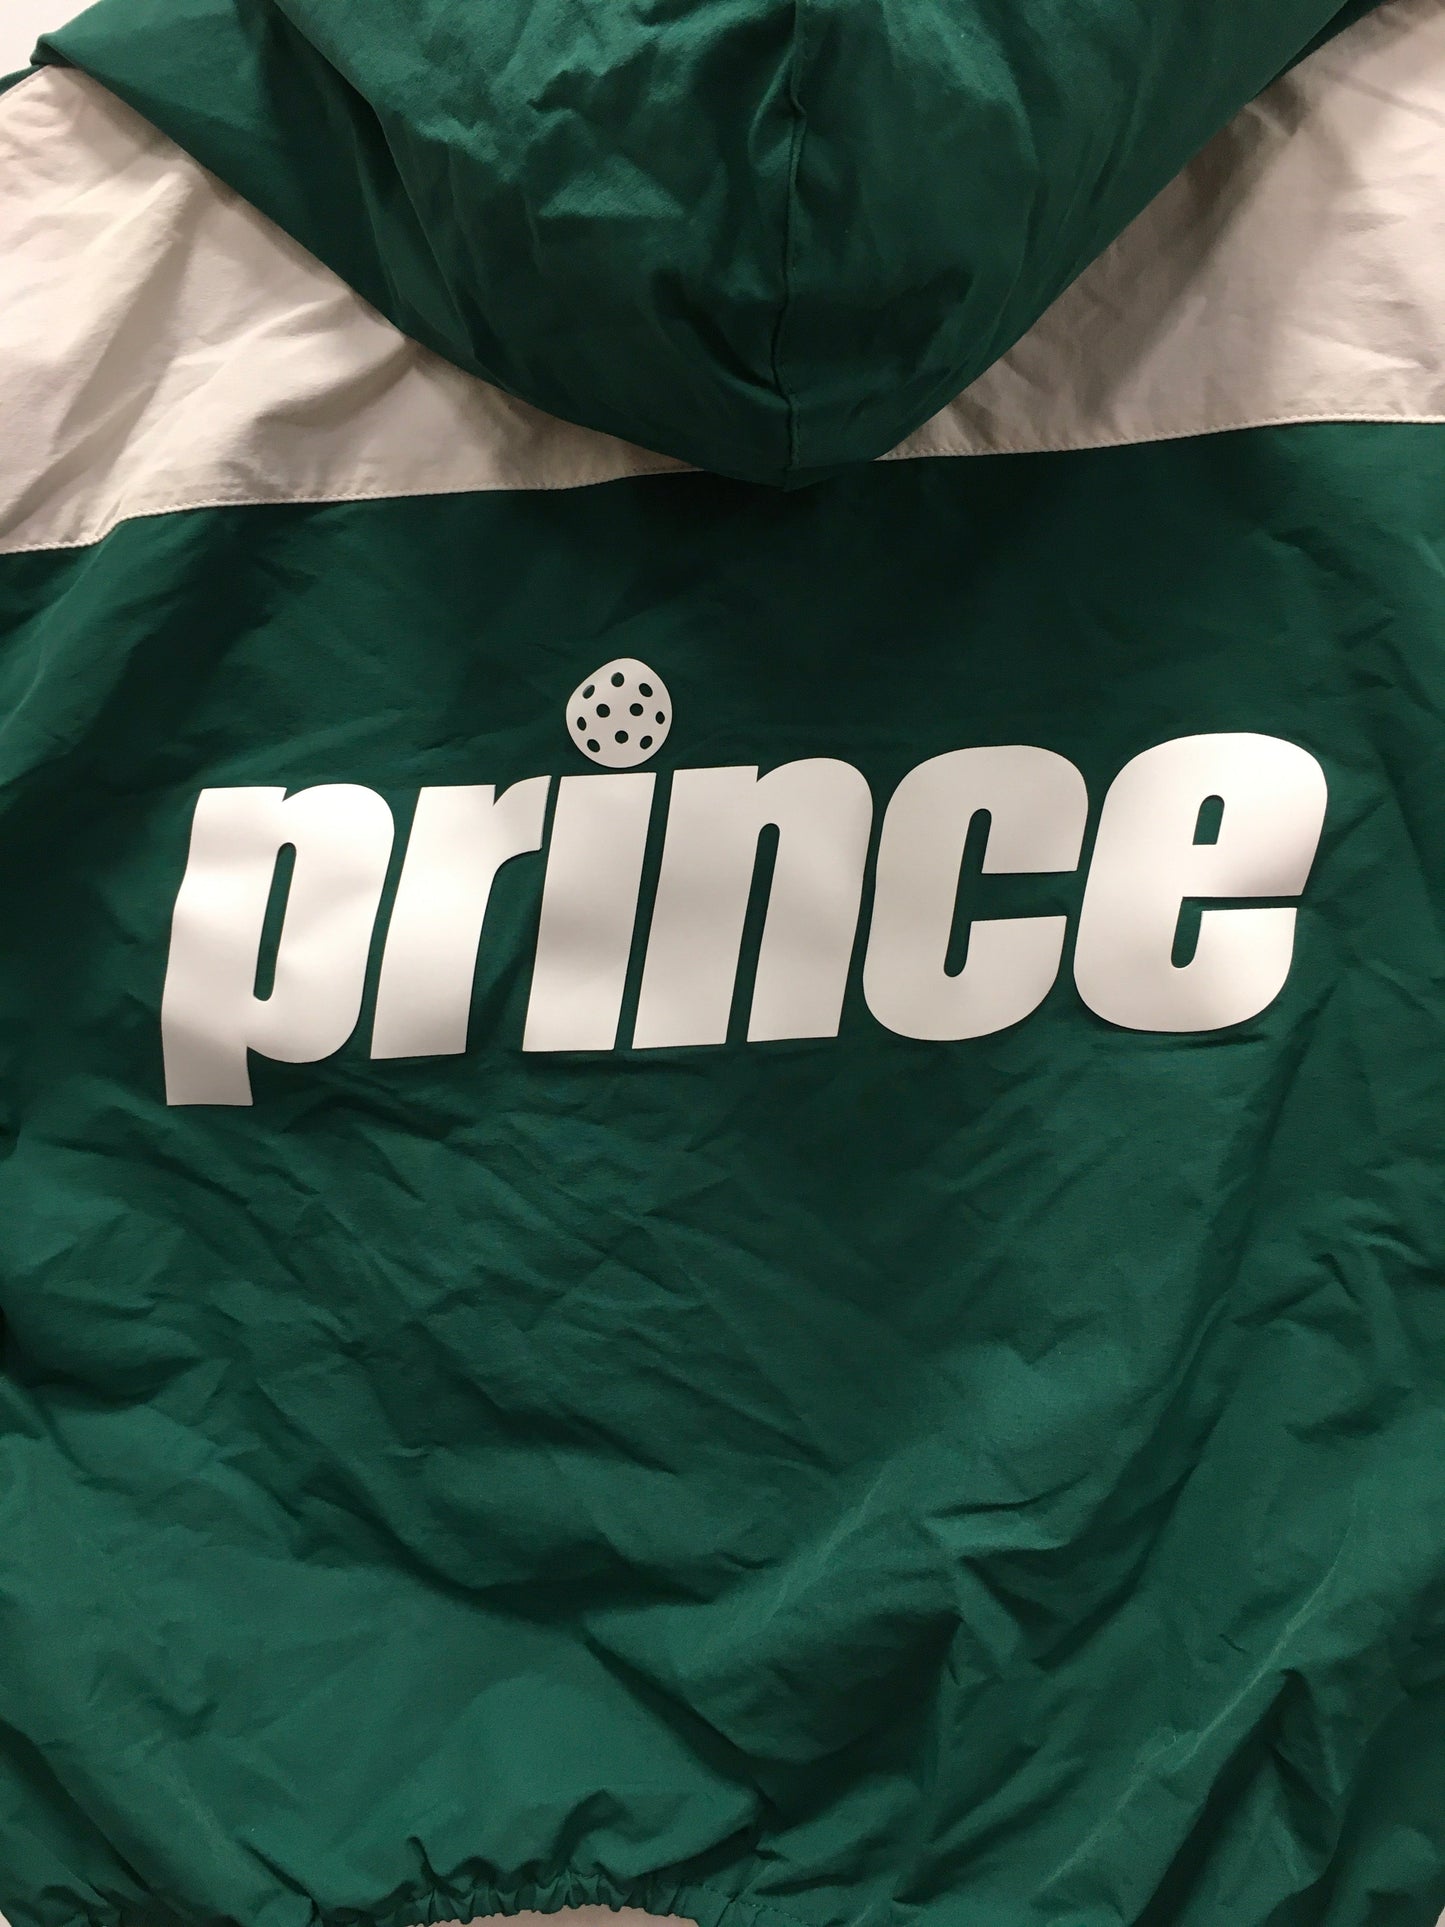 Green & White Athletic Jacket Clothes Mentor, Size Xs